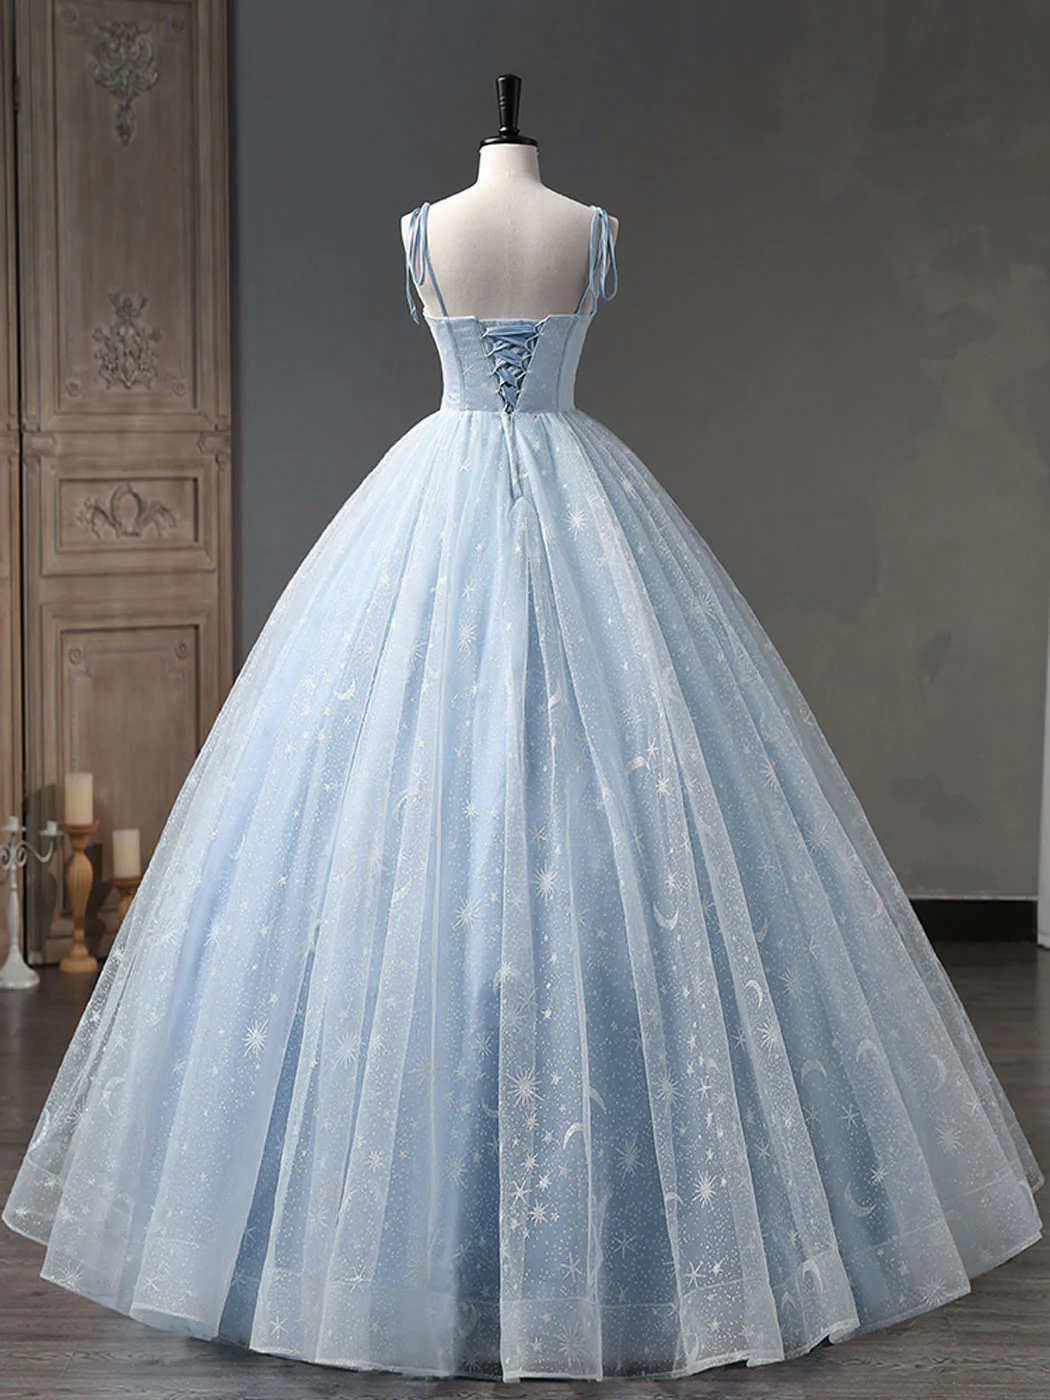 Star and Moon Fantasy Tulle A-Line Long Evening Dress, Blue Formal Sweet 16 Prom Dress Quinceanera Dress SH1063